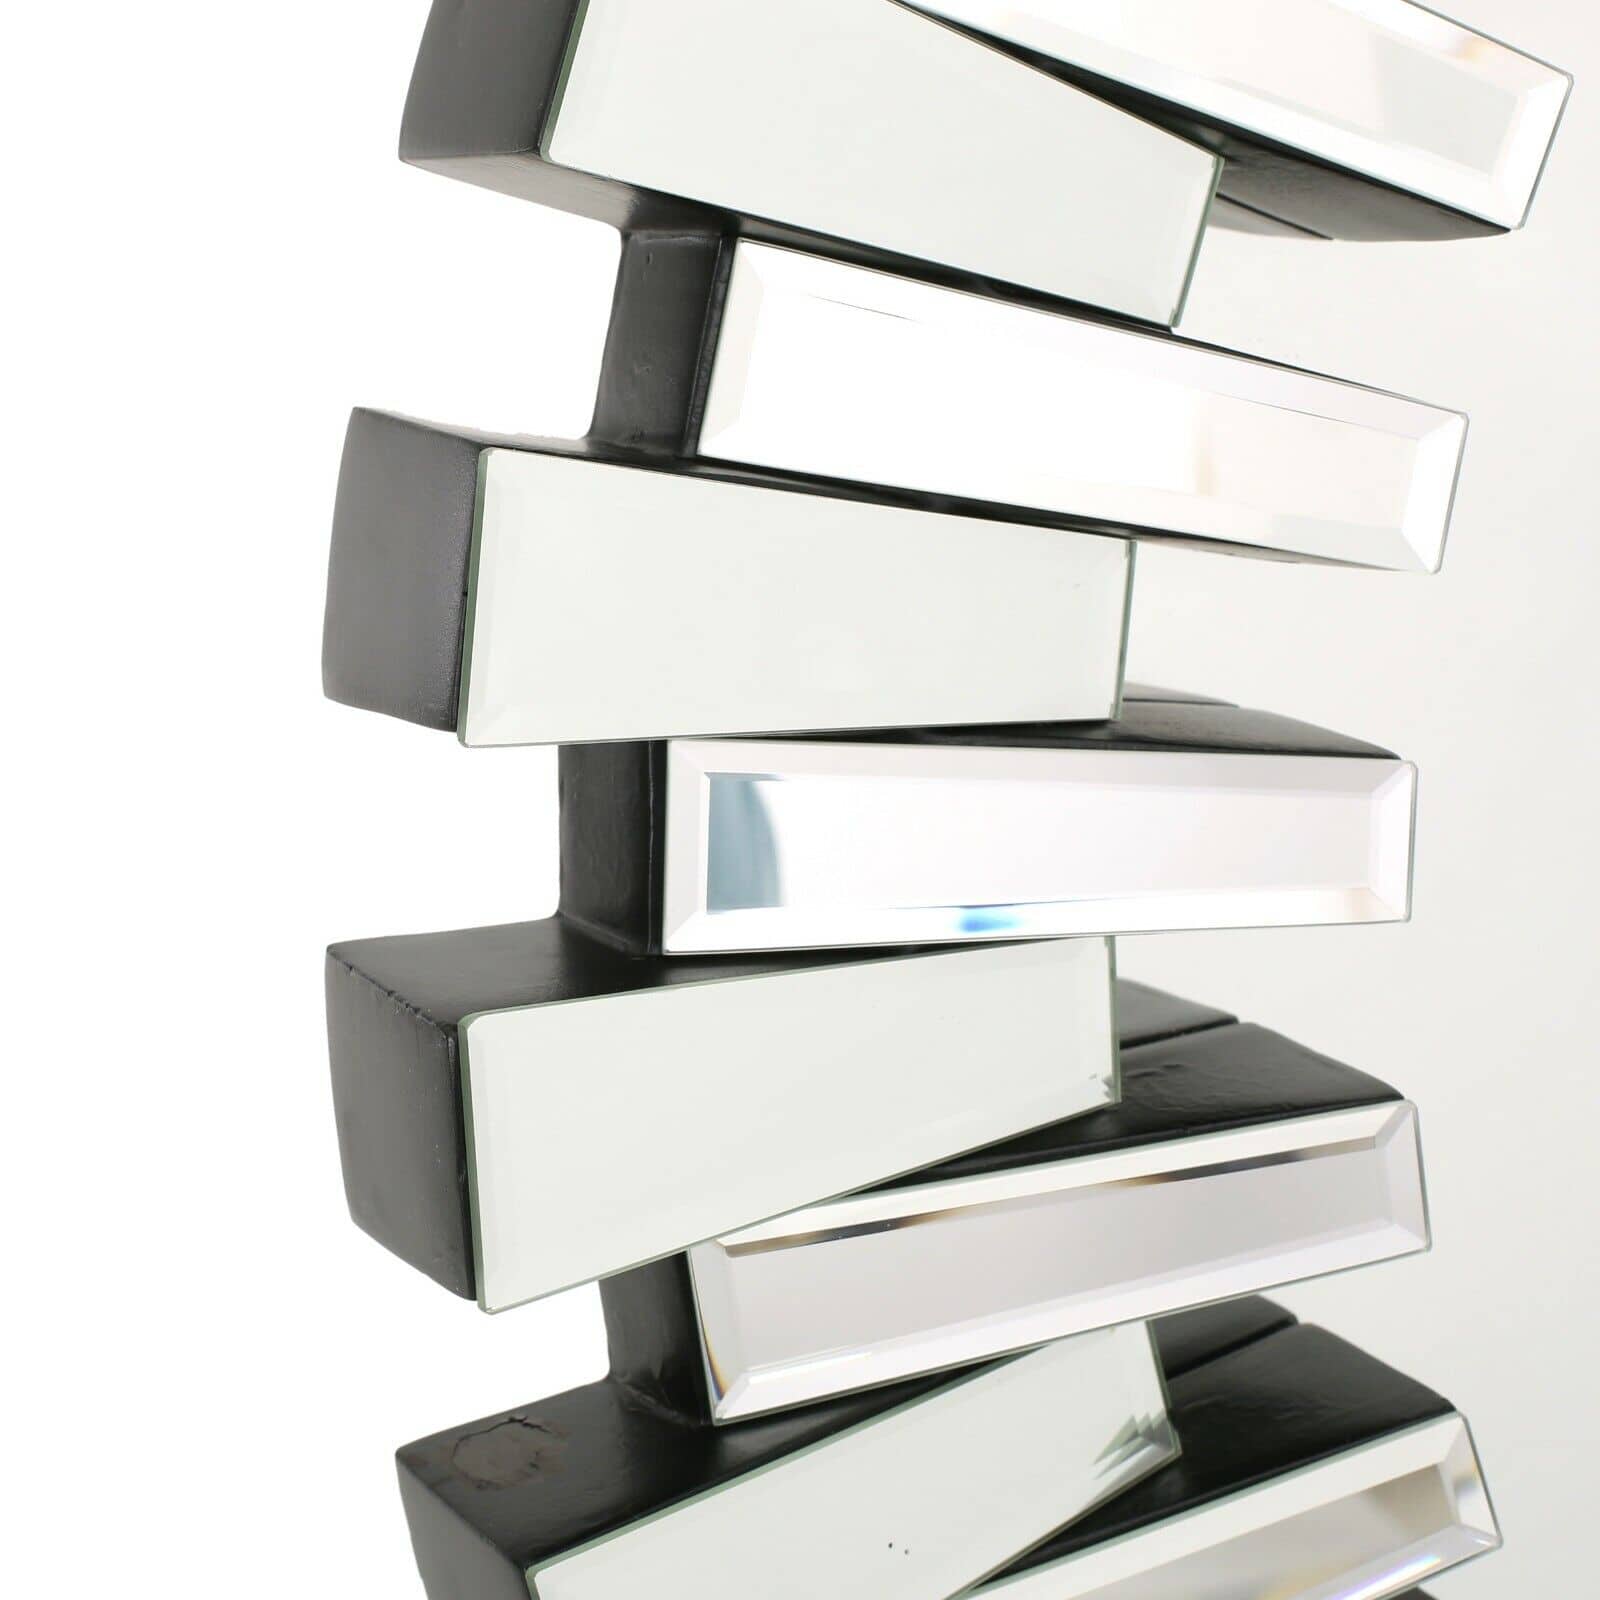 A stack of mirrors stacked on top of each other.